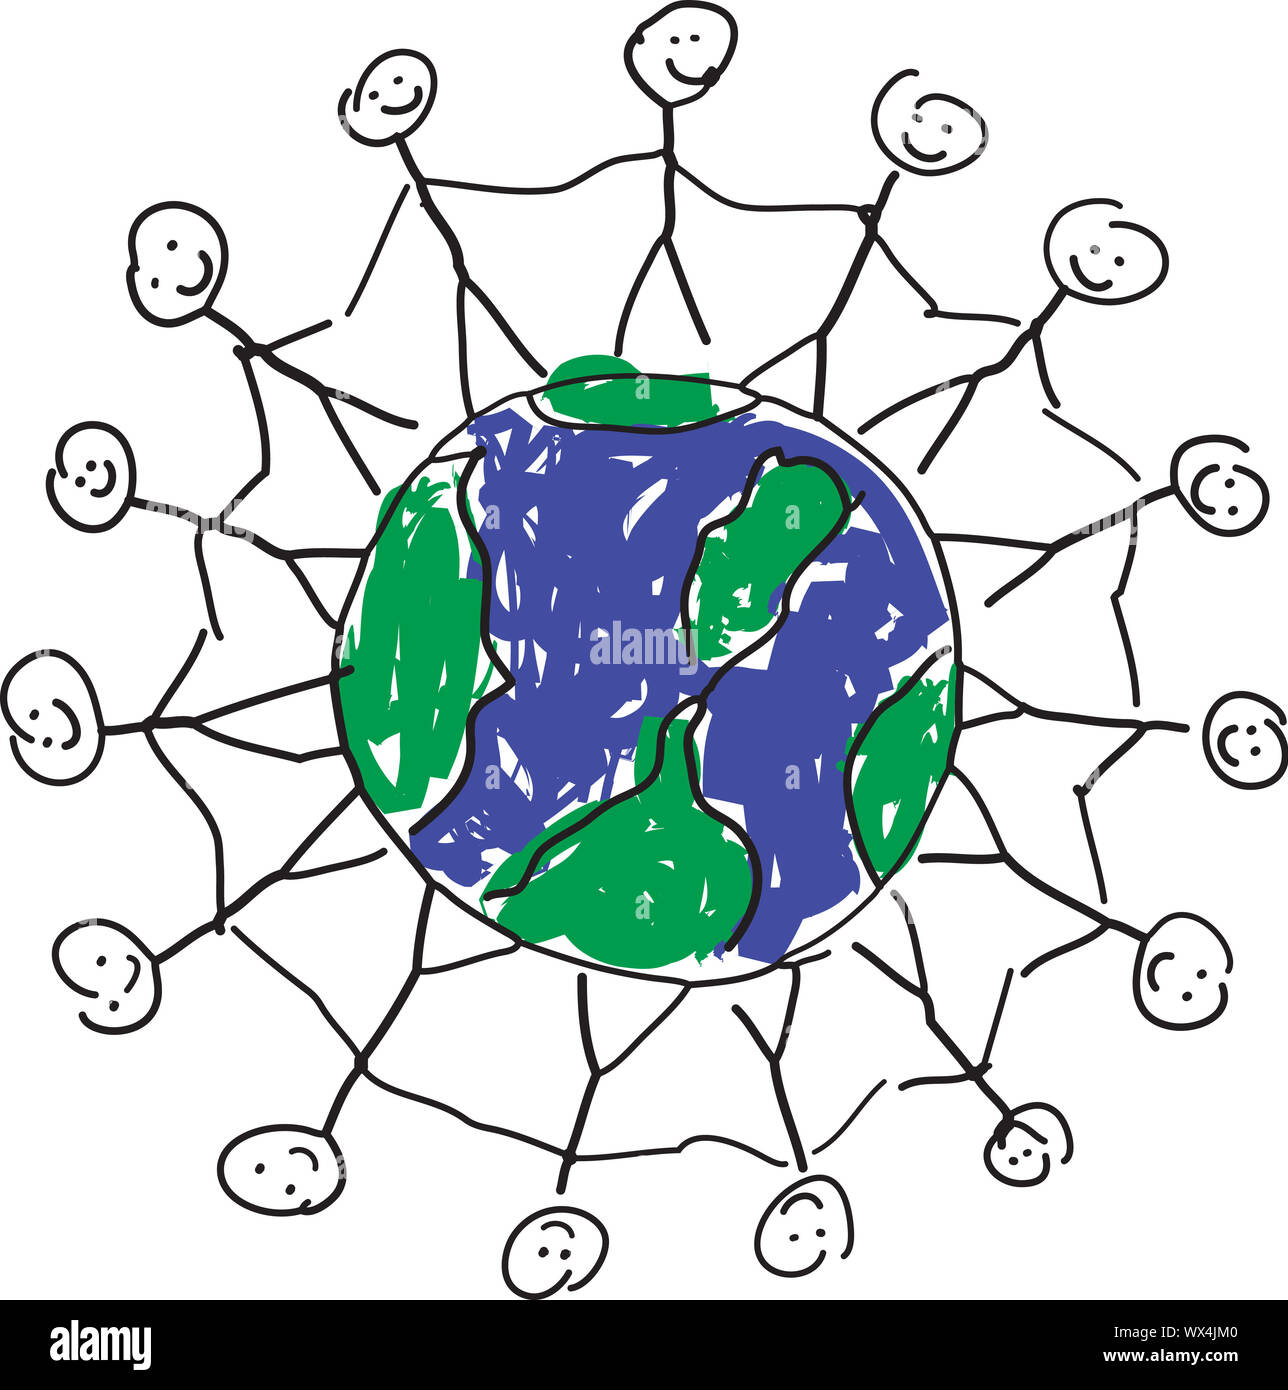 A child like drawing in vector format, displaying the world with people holding hands around it in friendship. Stock Photo